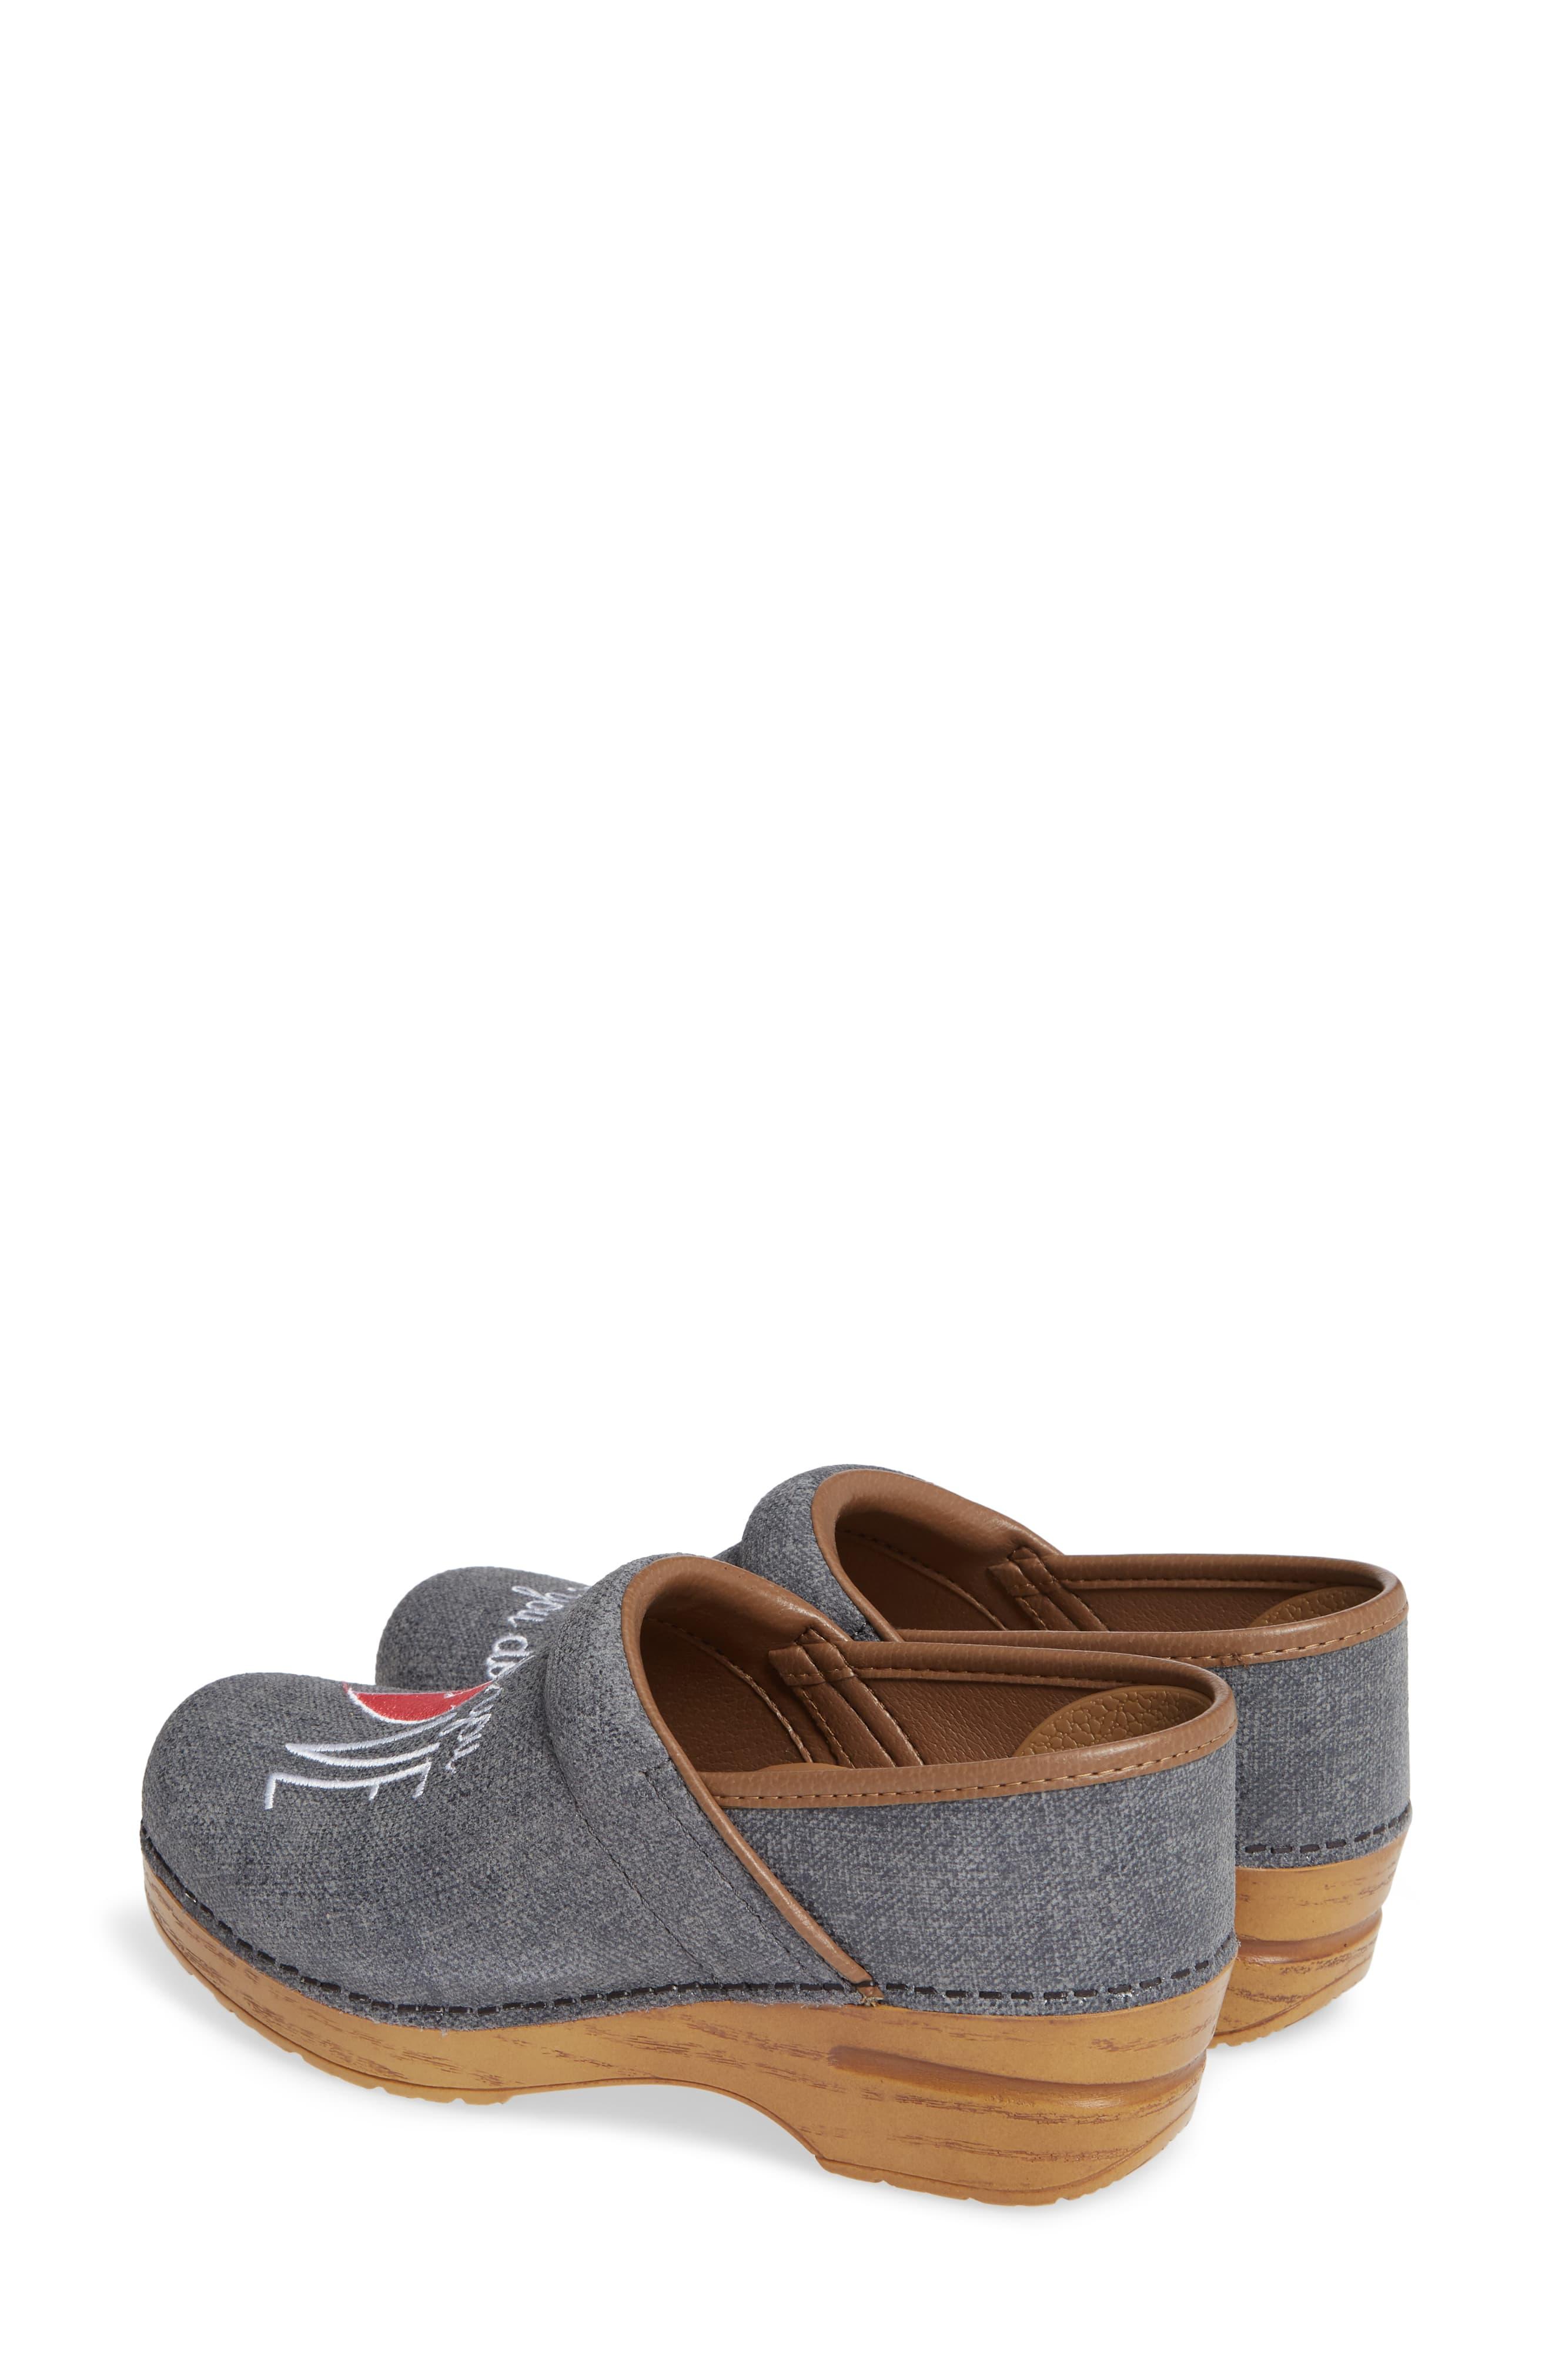 Dansko Canvas Twin Pro Embroidered Clog in Grey (Gray) - Lyst